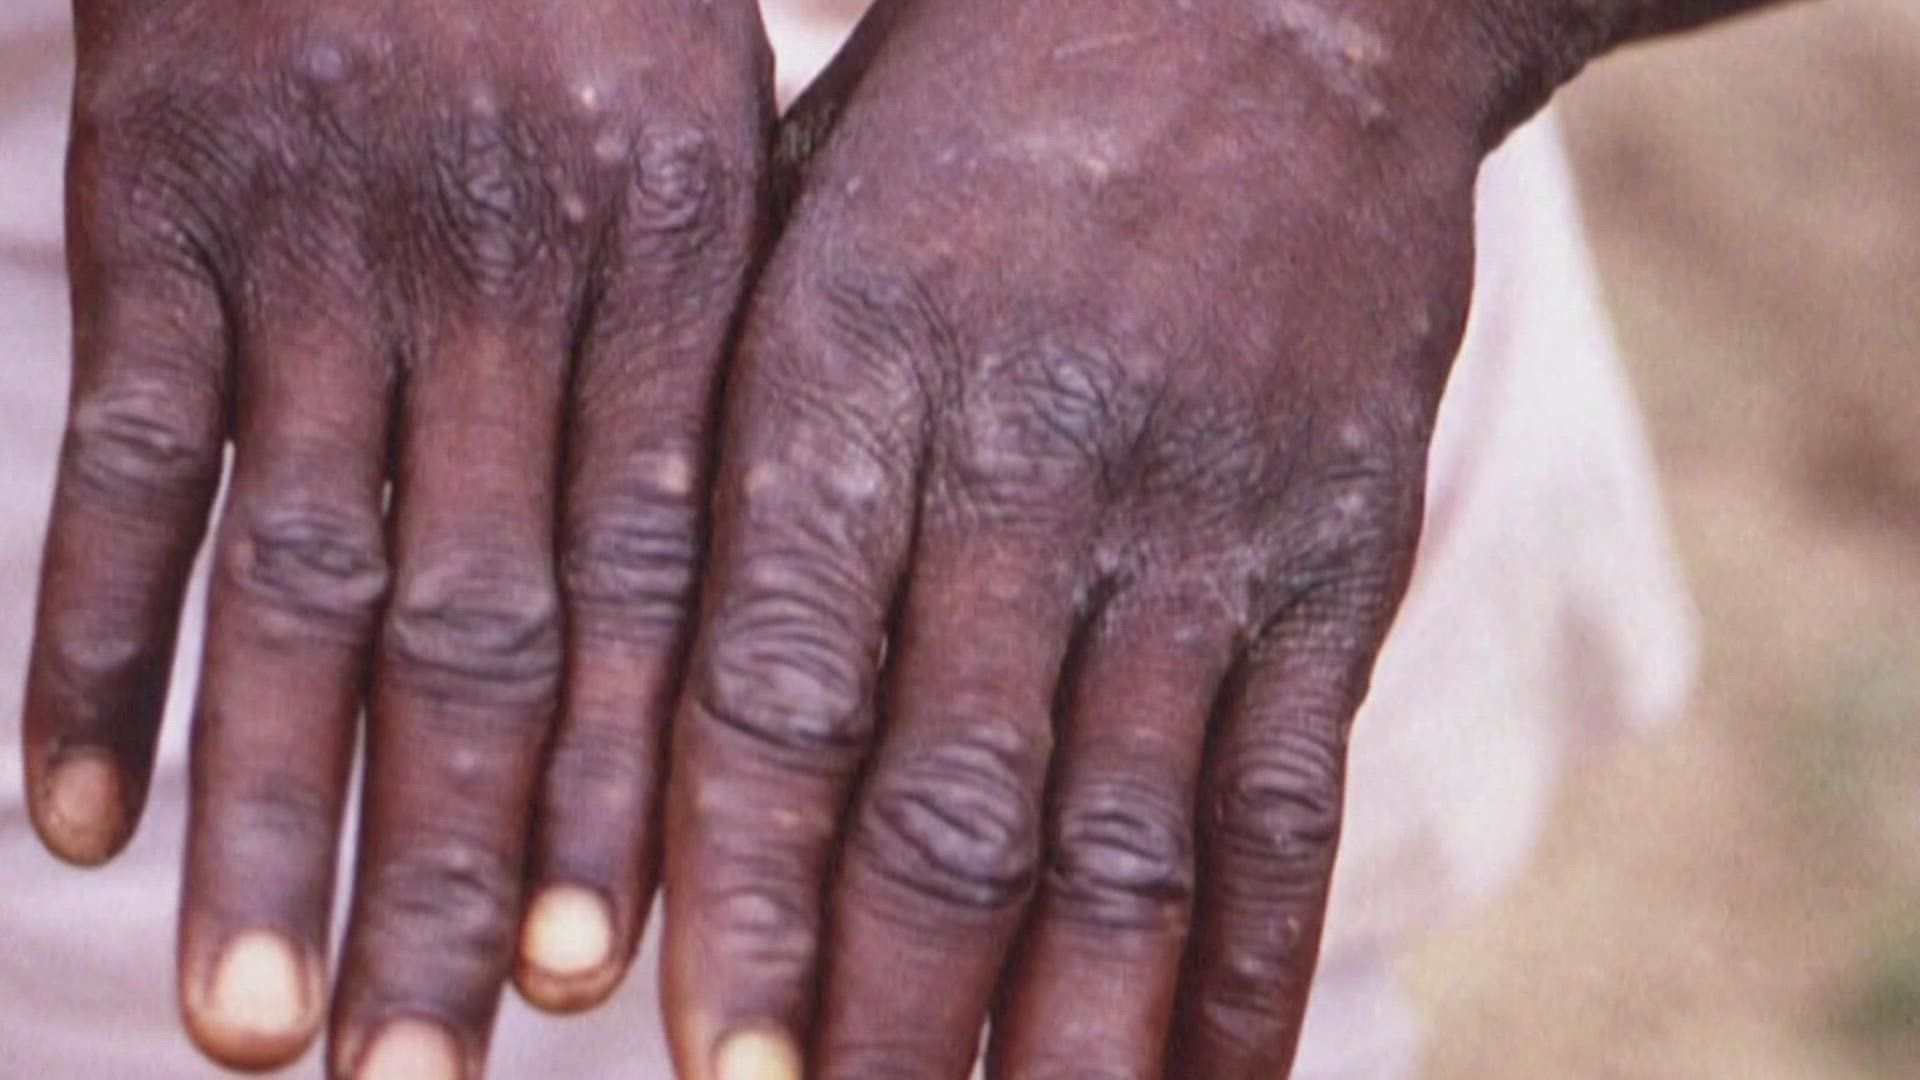 The number of monkeypox cases in Texas has increased to 27. The number of cases in Houston stands at 11 as of July 8, 2022.